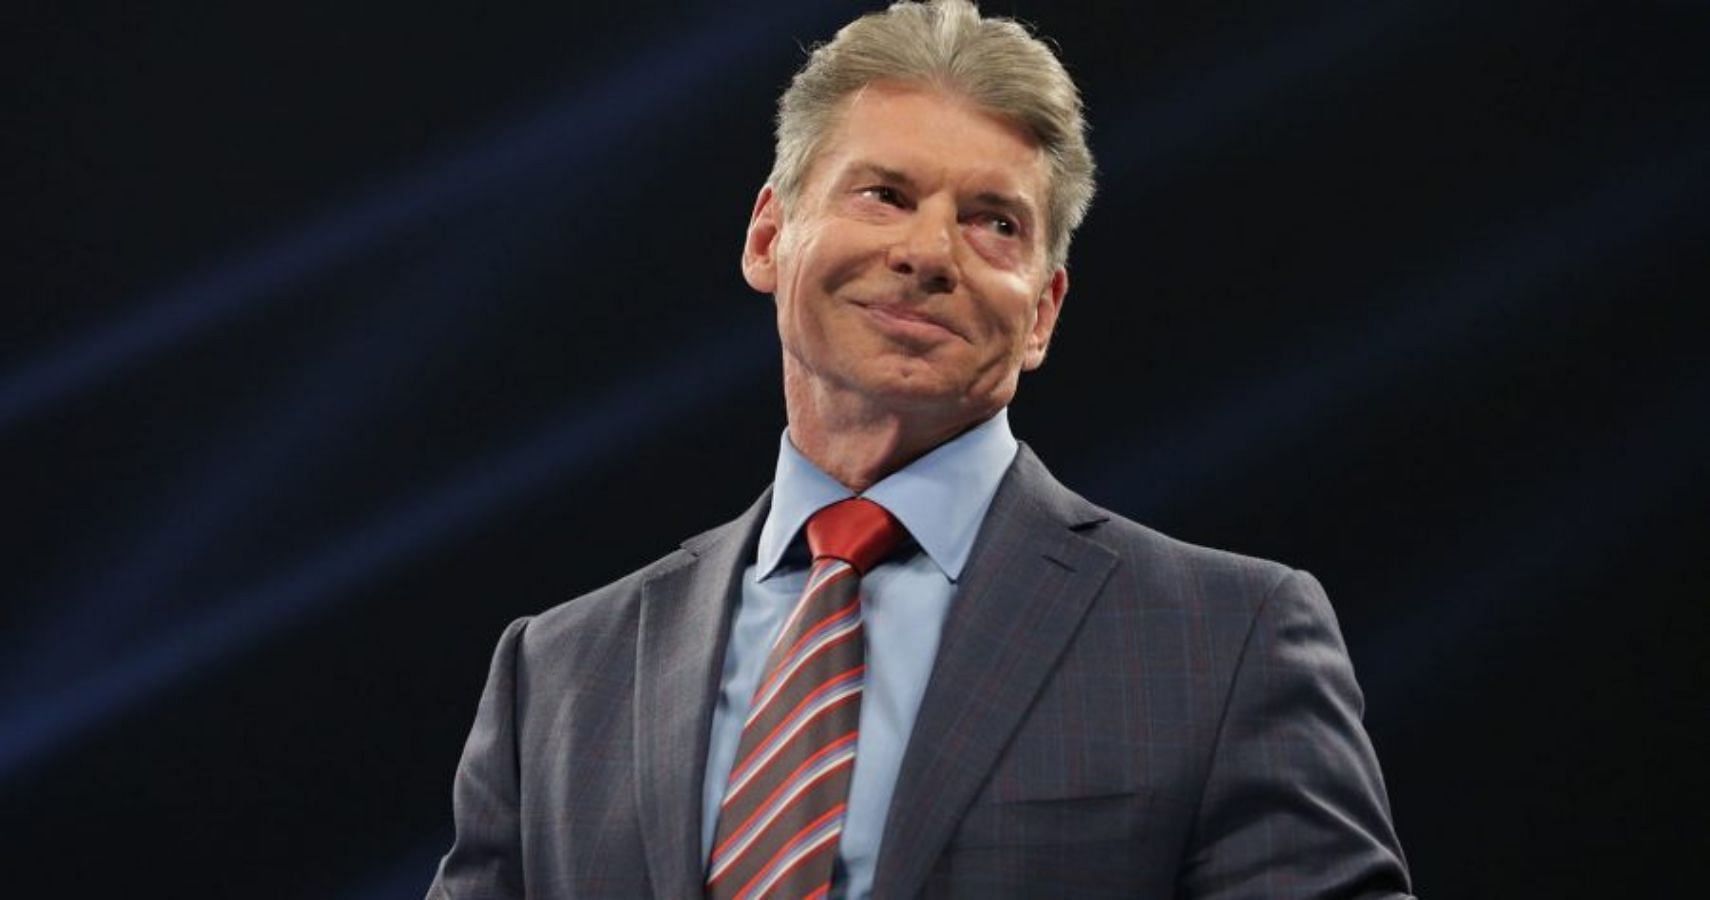 It was revealed that Vince McMahon was in the room with Sami Zayn and Austin Theory